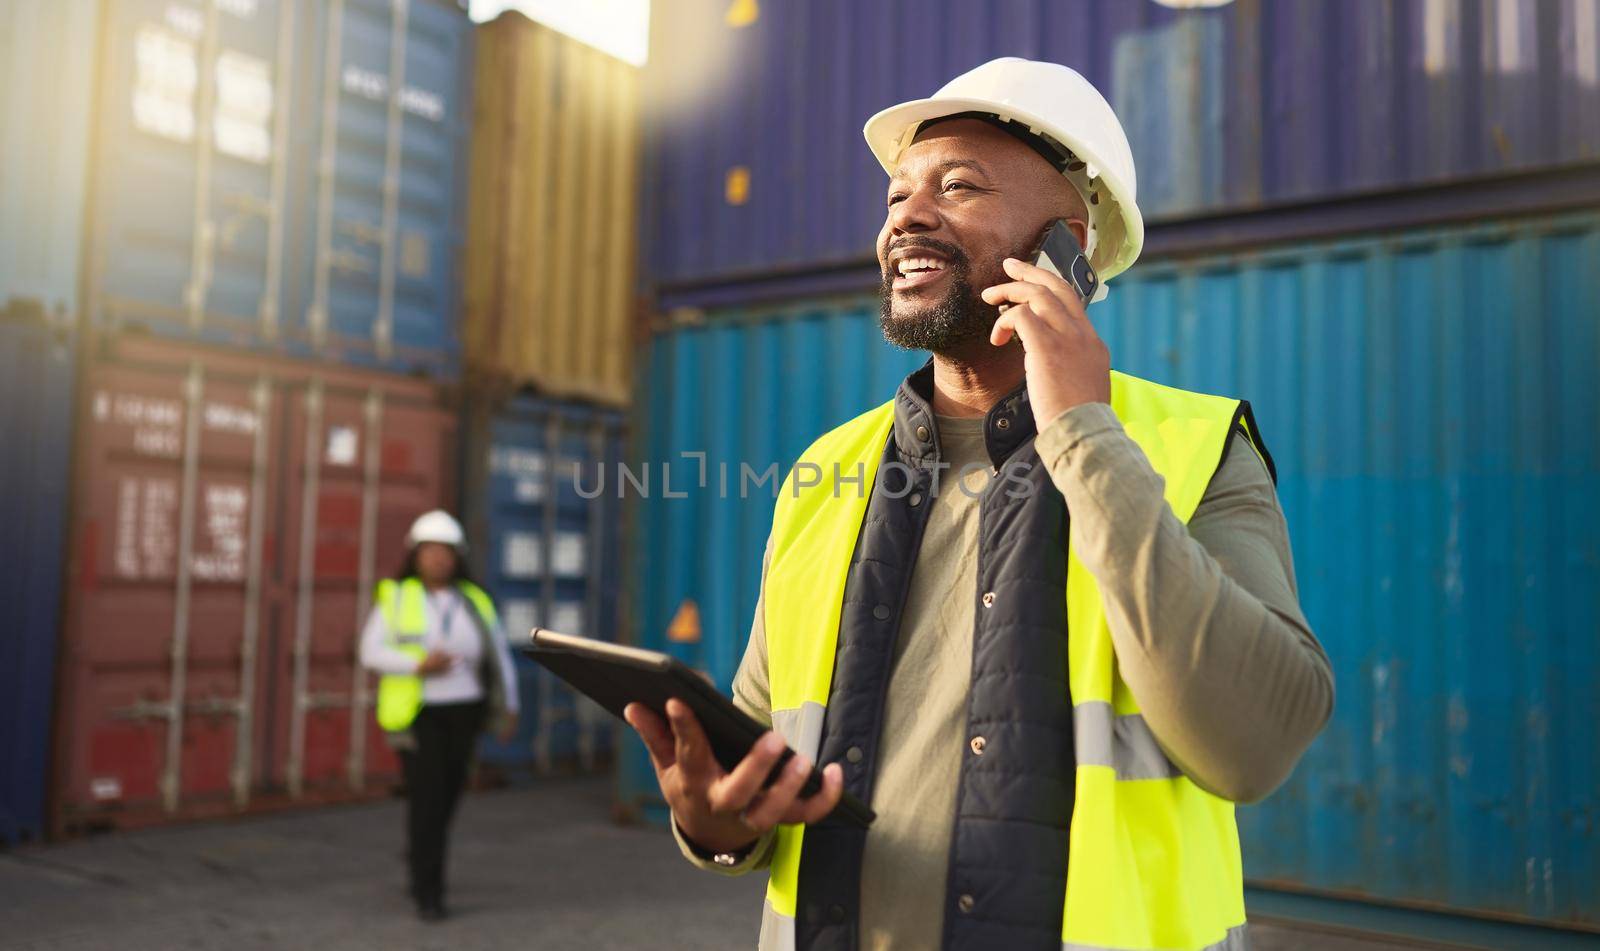 Logistics, shipping and construction worker on the phone with tablet in shipyard. Transportation engineer on smartphone in delivery, freight and international distribution business in container yard by YuriArcurs